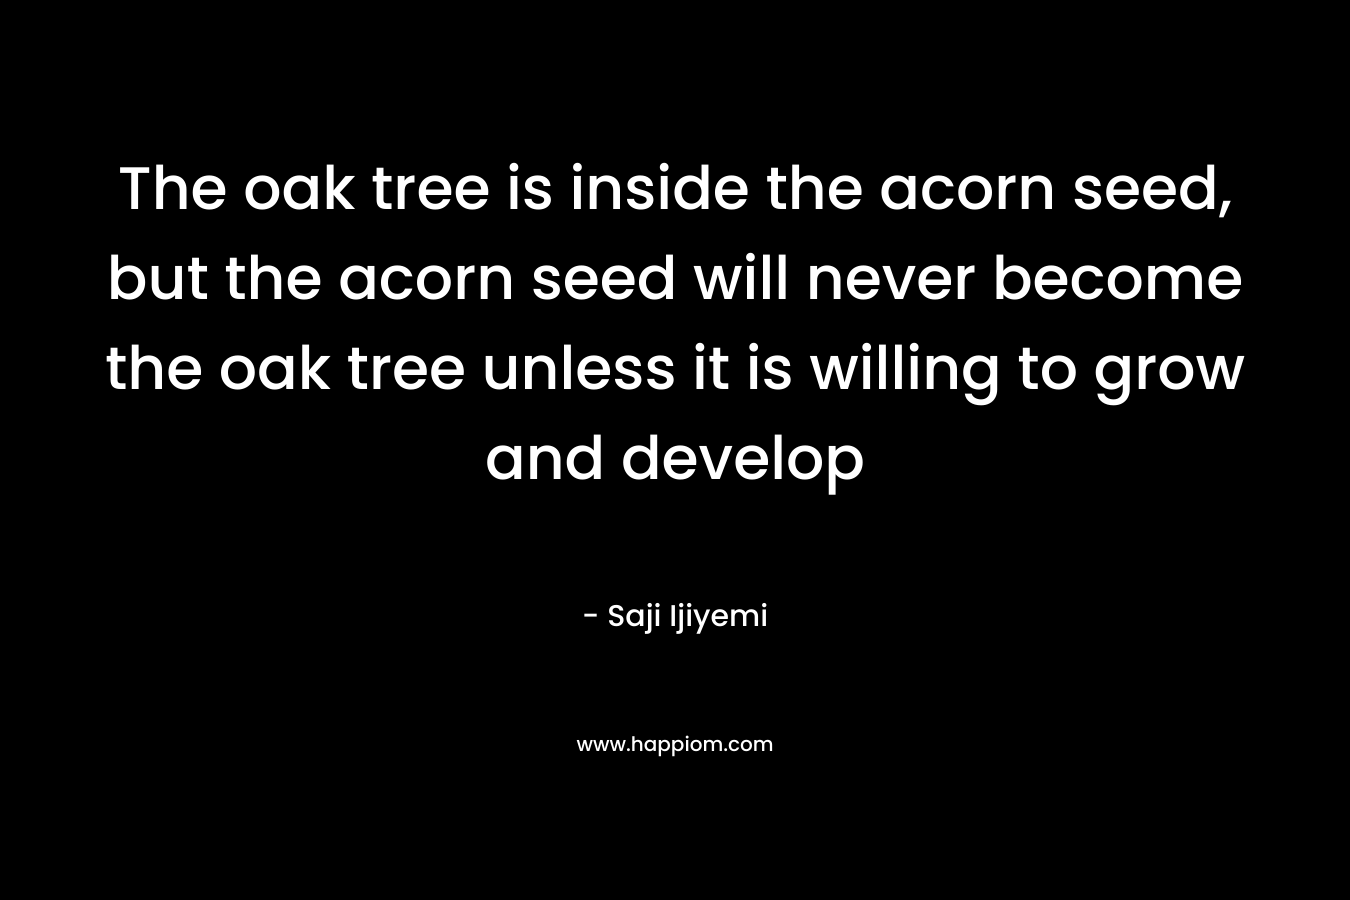 The oak tree is inside the acorn seed, but the acorn seed will never become the oak tree unless it is willing to grow and develop